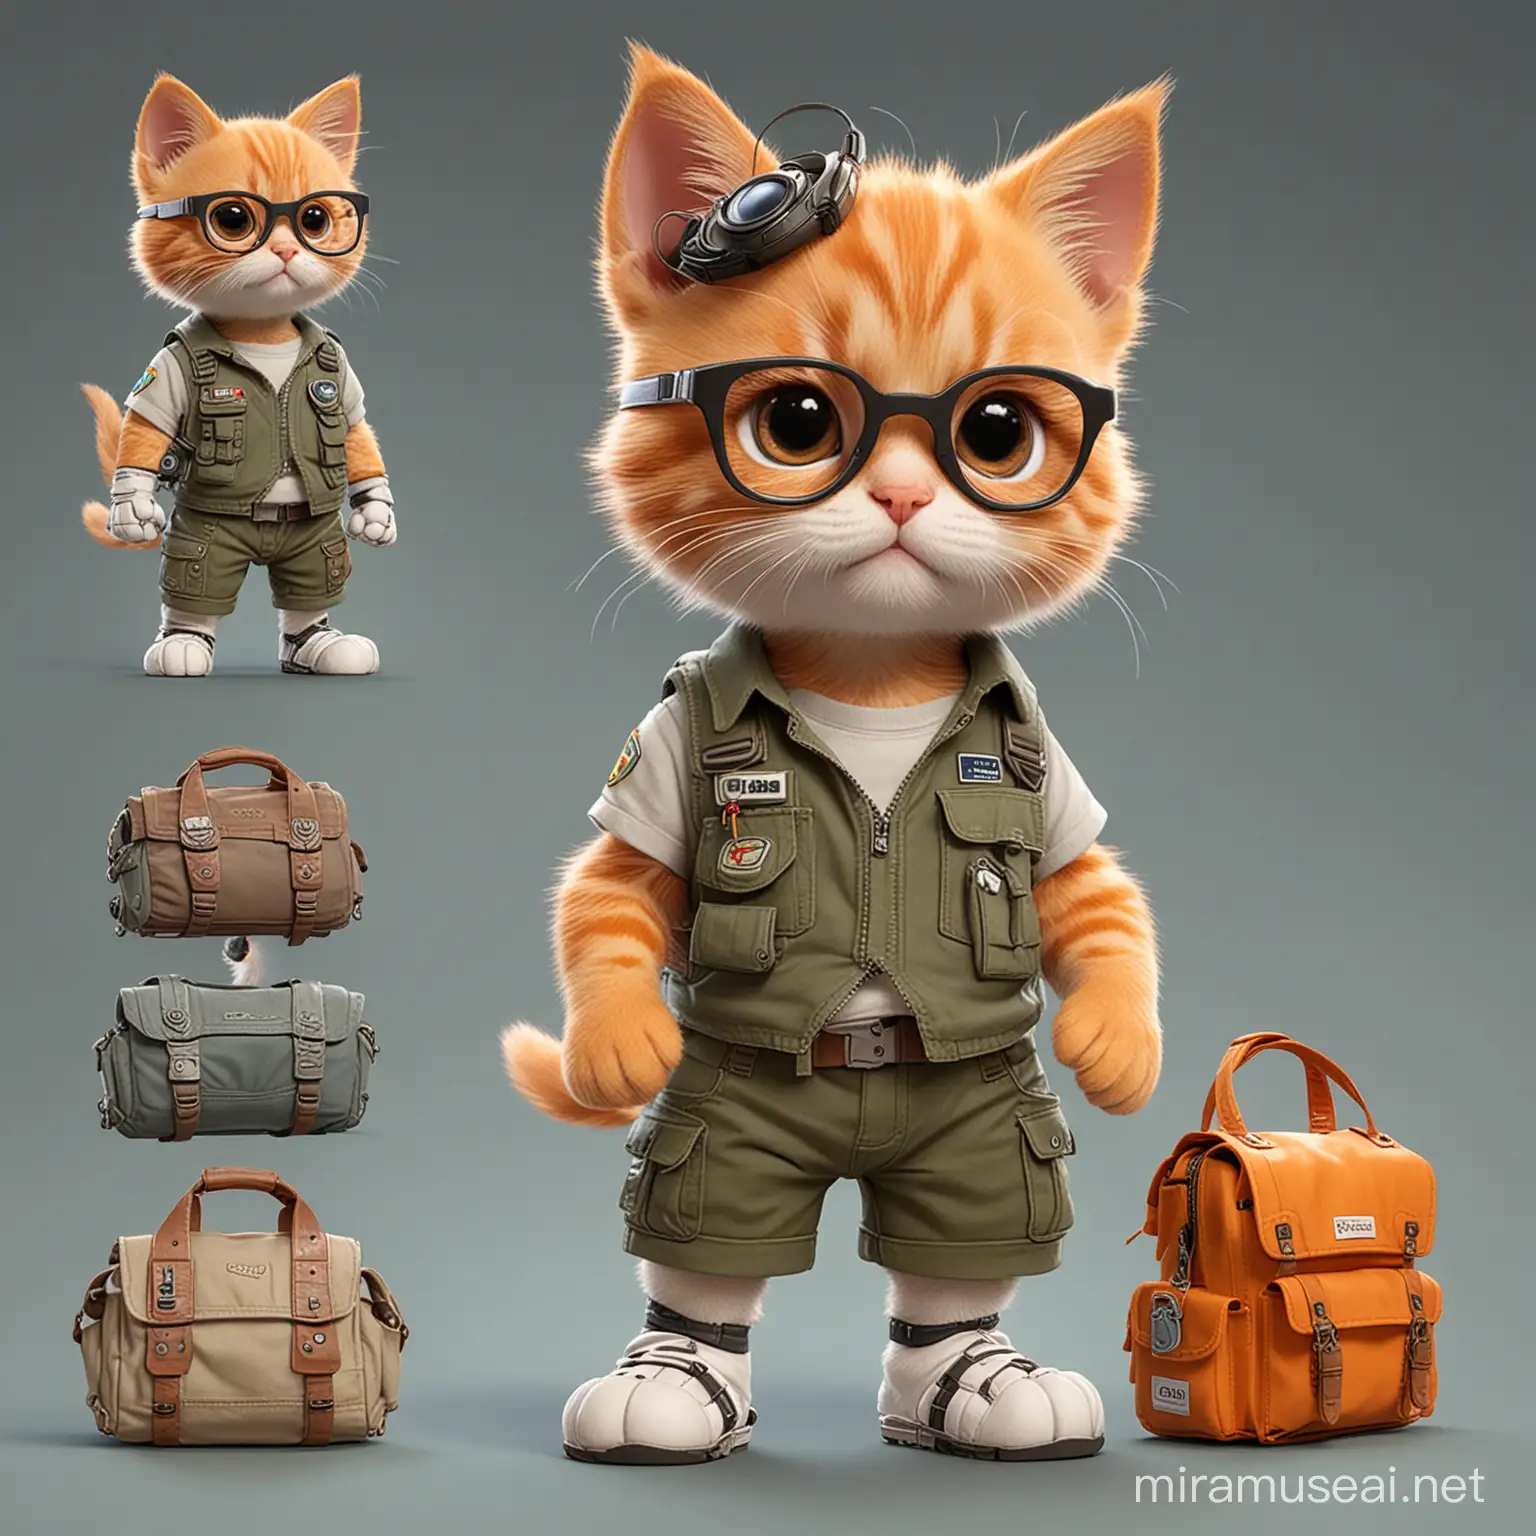 Adorable Baby Orange Kitten in Pilot Gear and Adventure Outfit